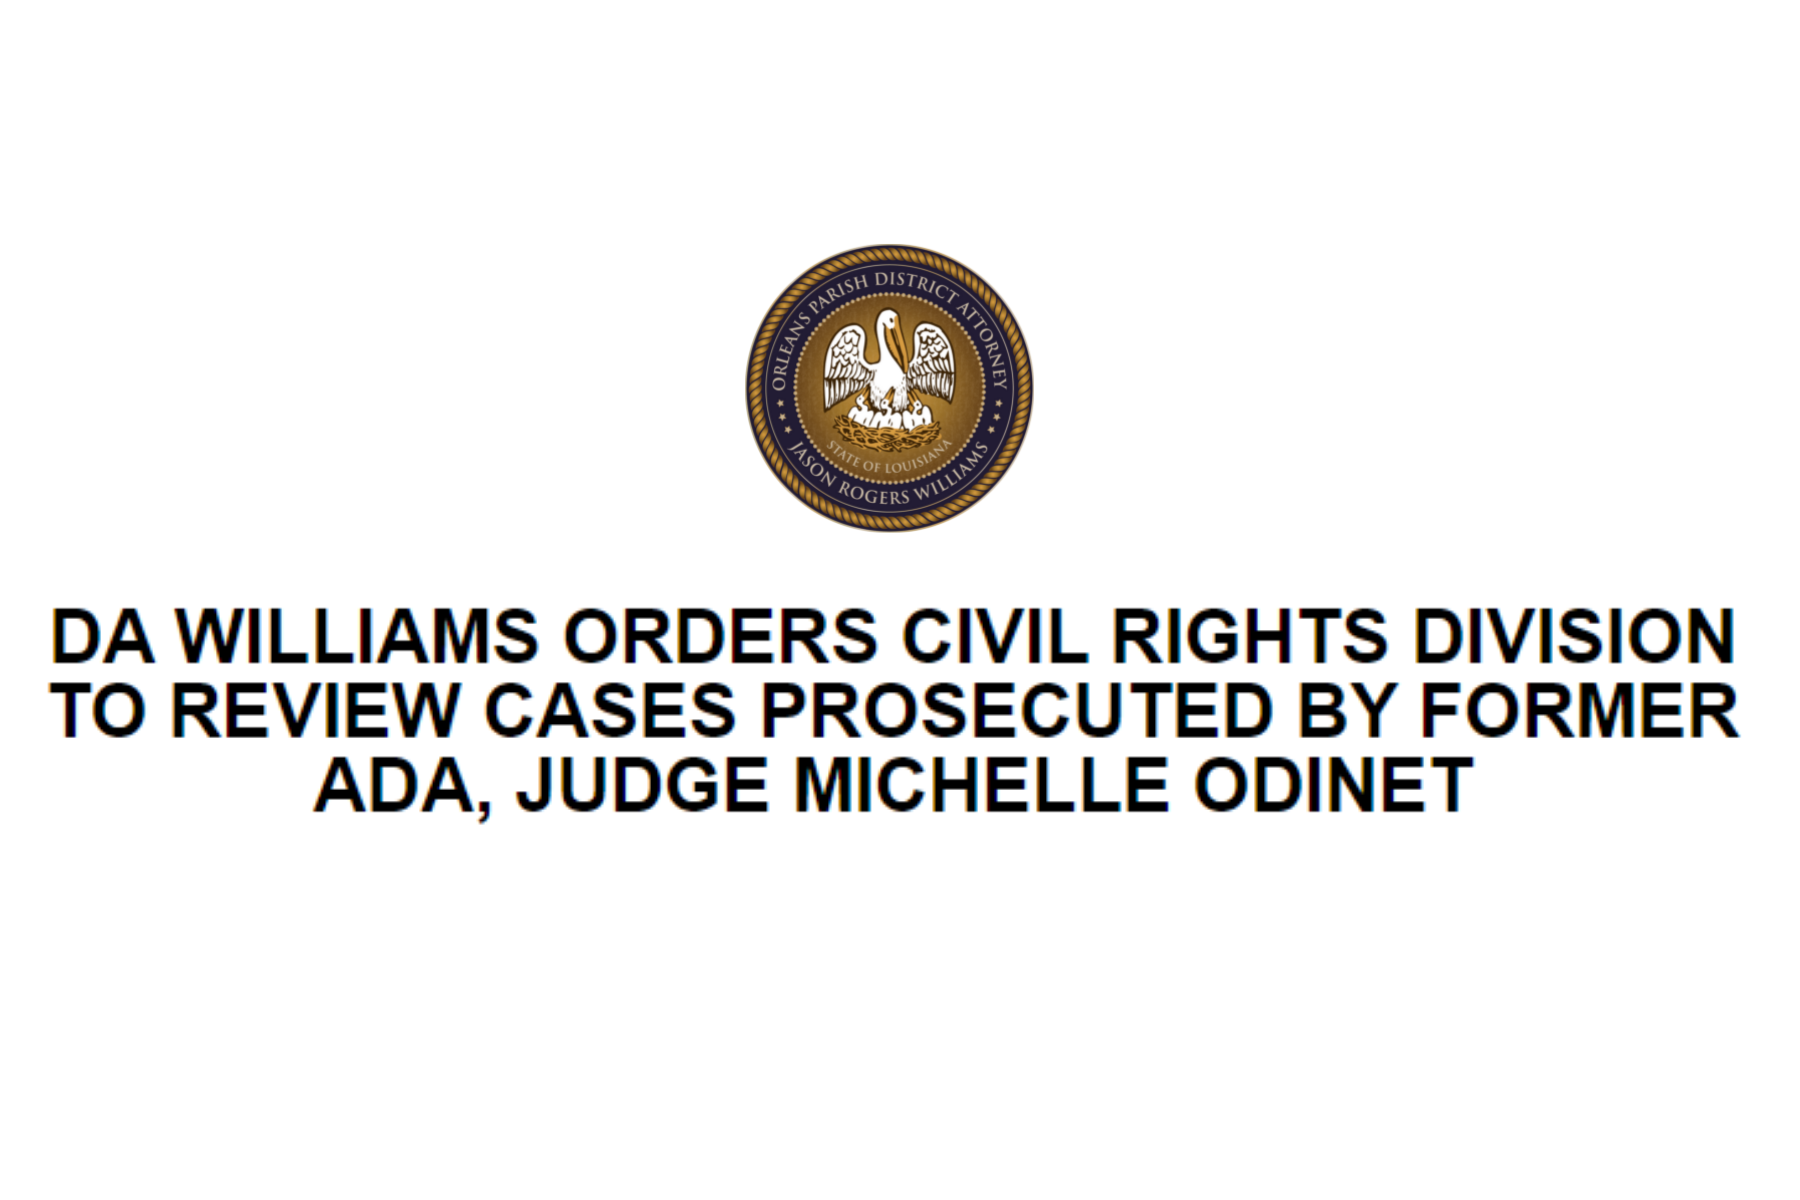 DA WILLIAMS ORDERS CIVIL RIGHTS DIVISION TO REVIEW CASES PROSECUTED BY FORMER ADA, JUDGE MICHELLE ODINET